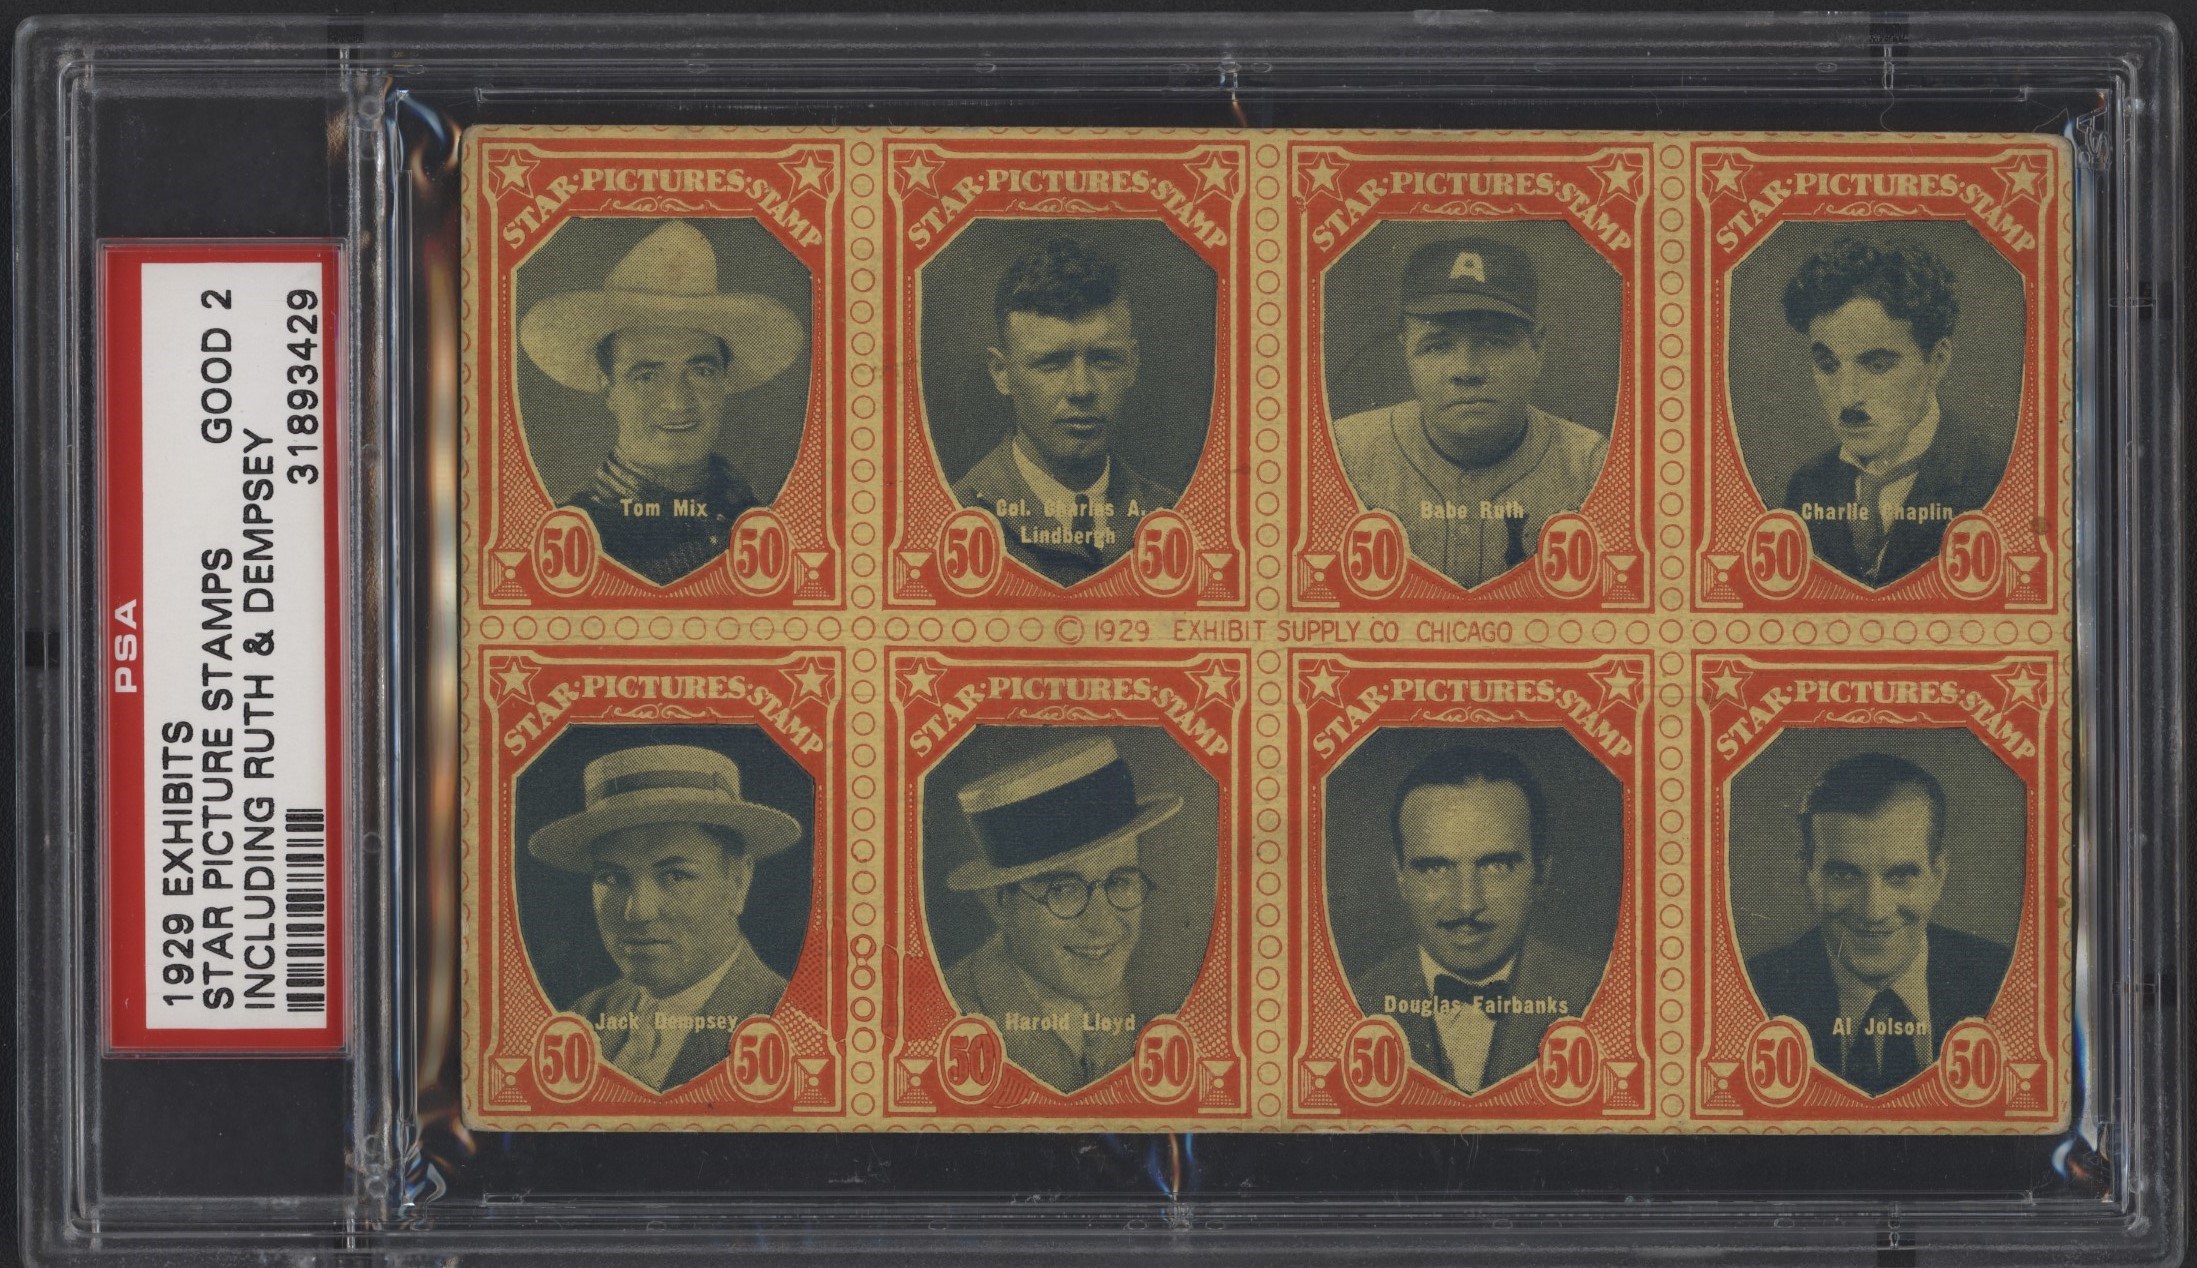 Baseball and Trading Cards - 1929 Exhibits Star Picture Stamps Collection of (16) with (2) Ruth Sheets